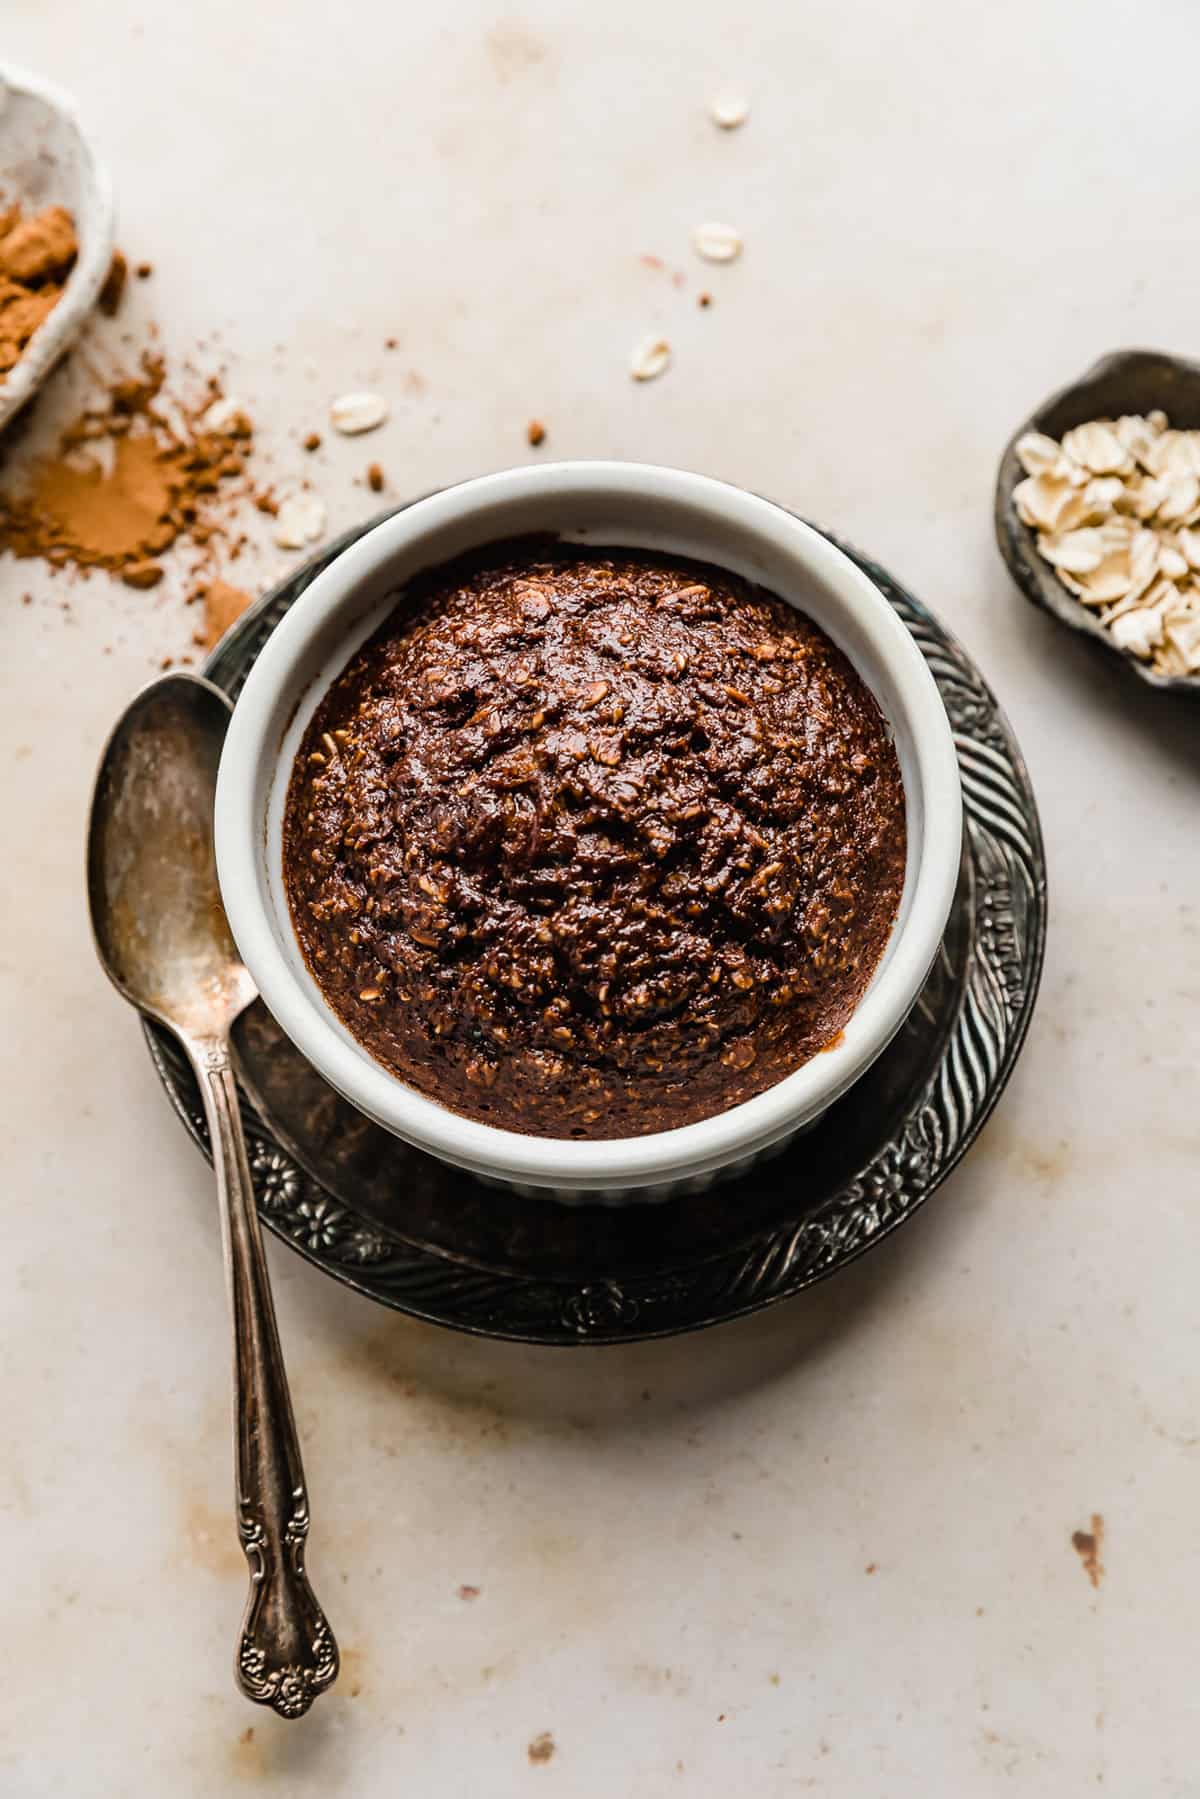 Chocolate Baked Oats in a white ramekin on a brown plate.